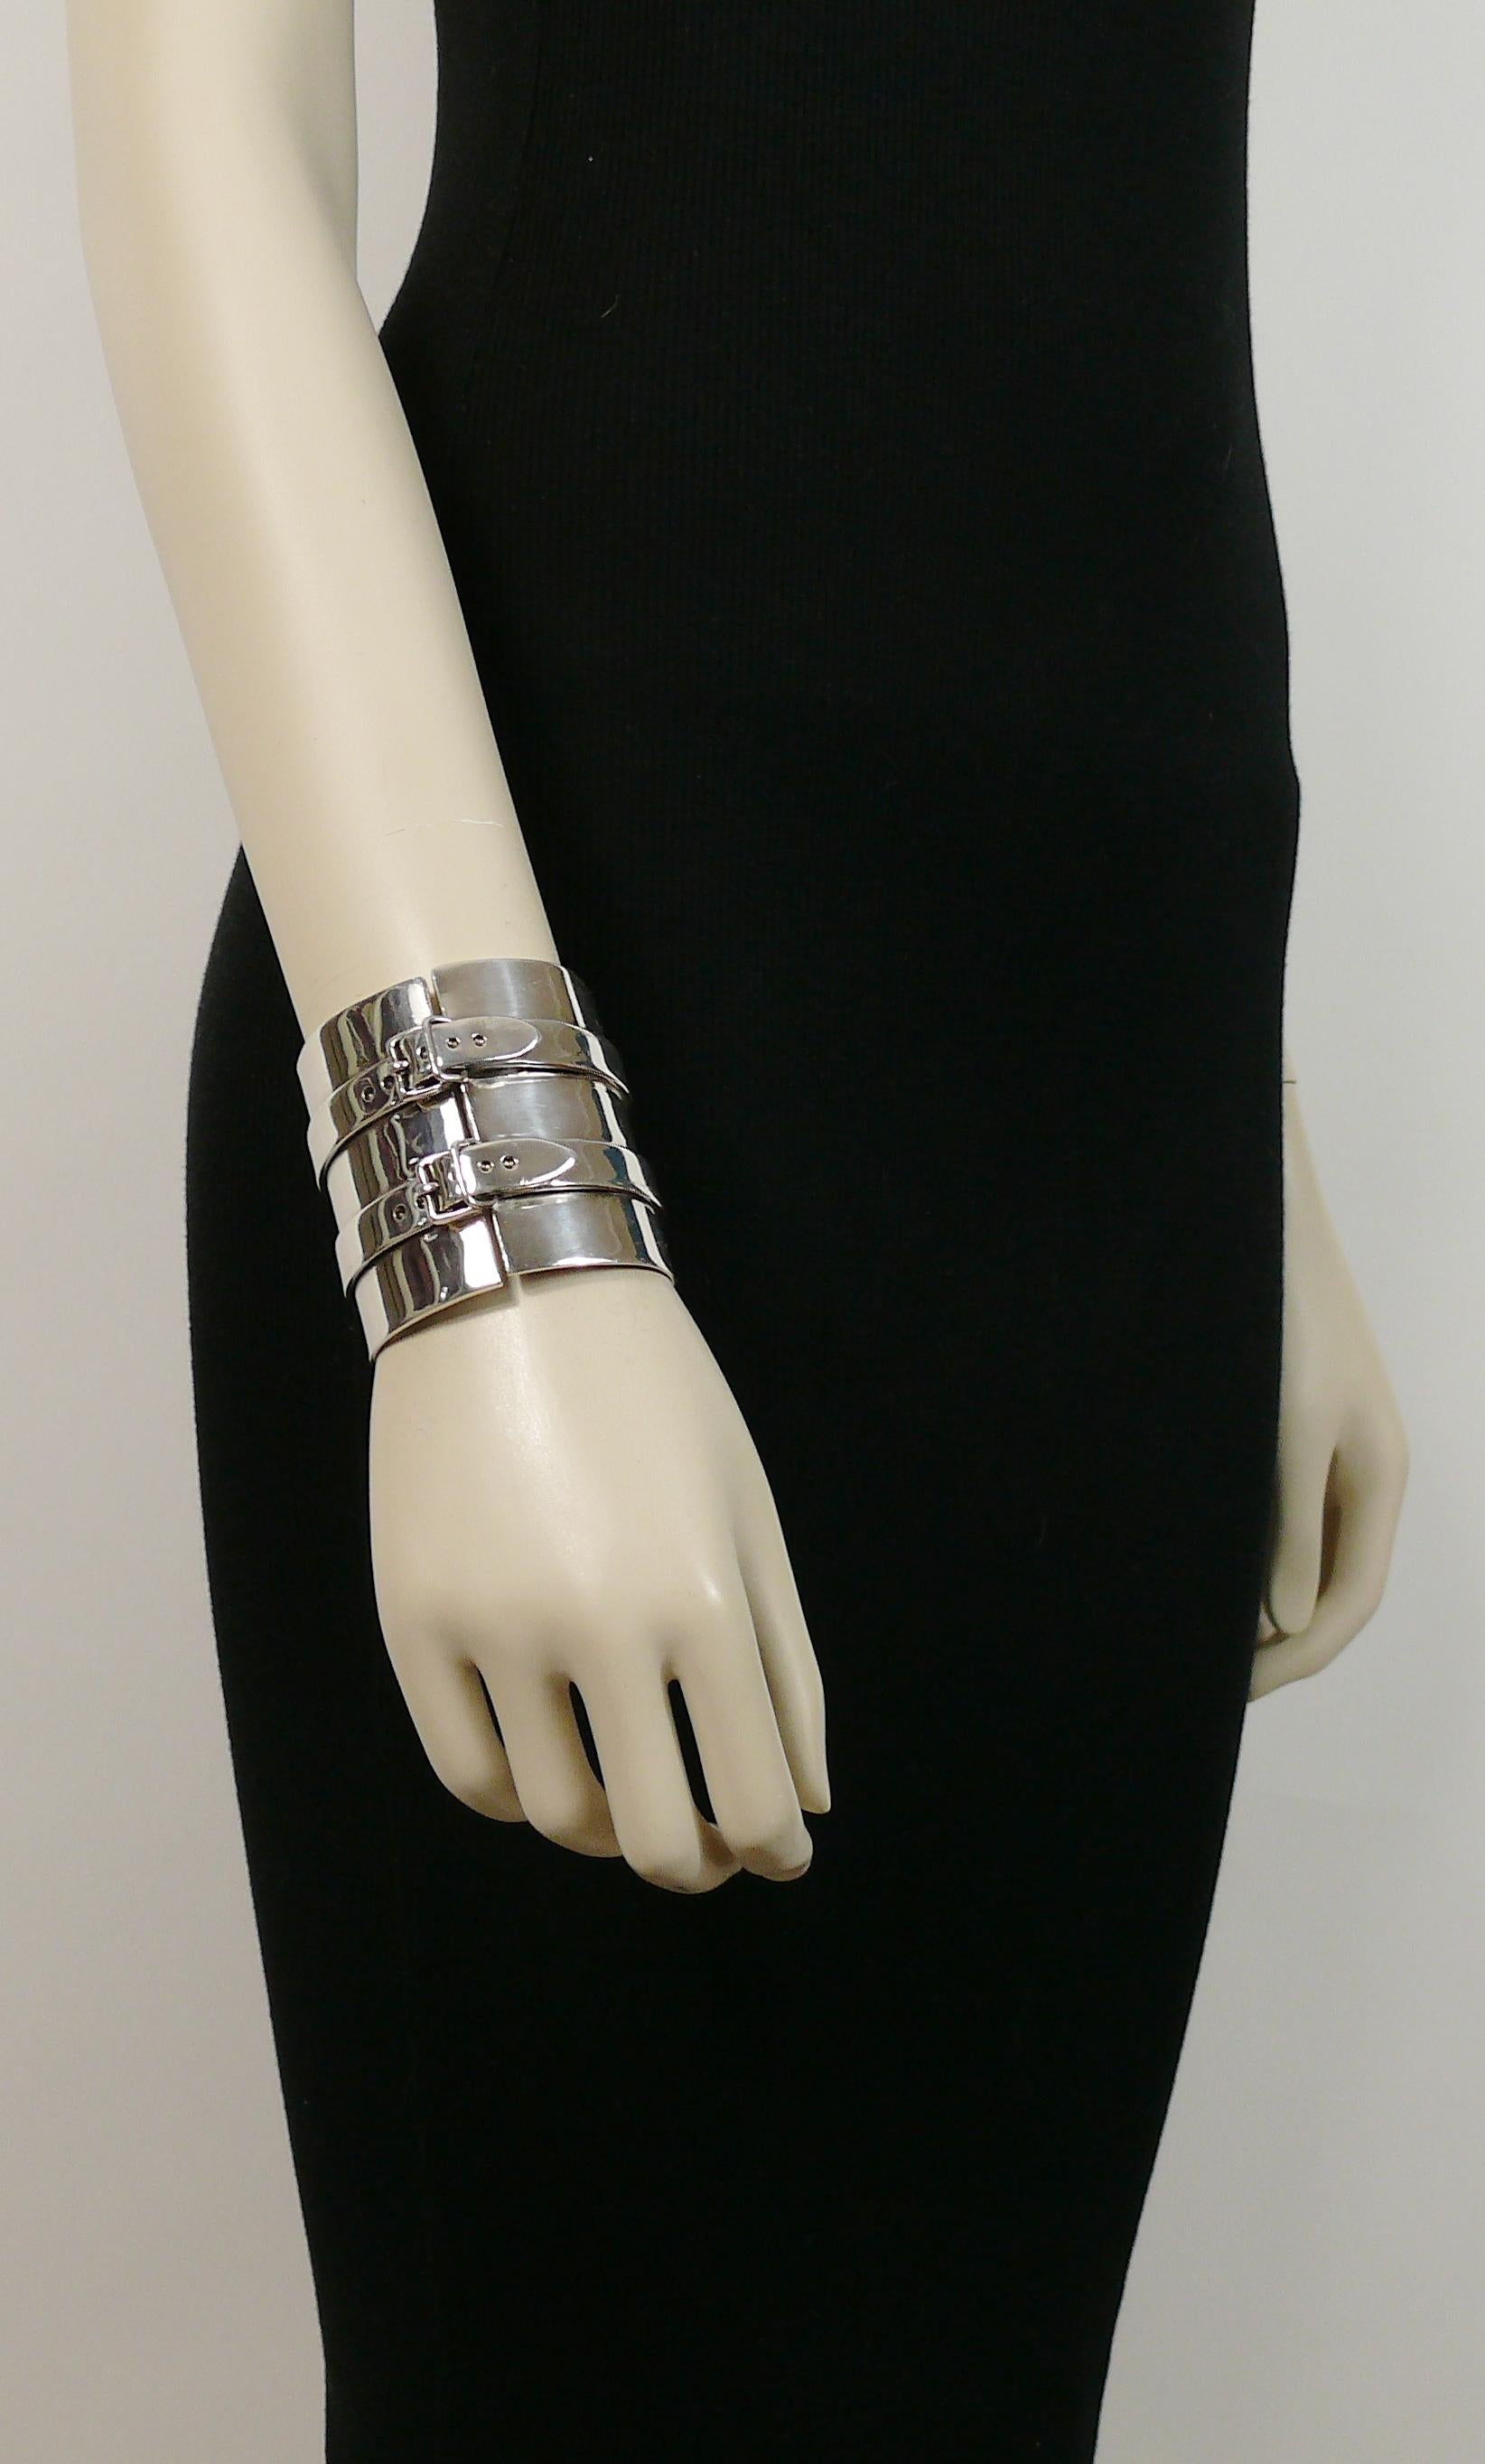 JEAN PAUL GAULTIER rare polished silver toned wide cuff bracelet featuring amazing buckle details.

Embossed JEAN PAUL GAULTIER.

Indicative measurements : inner circumference approx. 17.91 cm (7.05 inches) / width approx. 6.3 cm (2.48